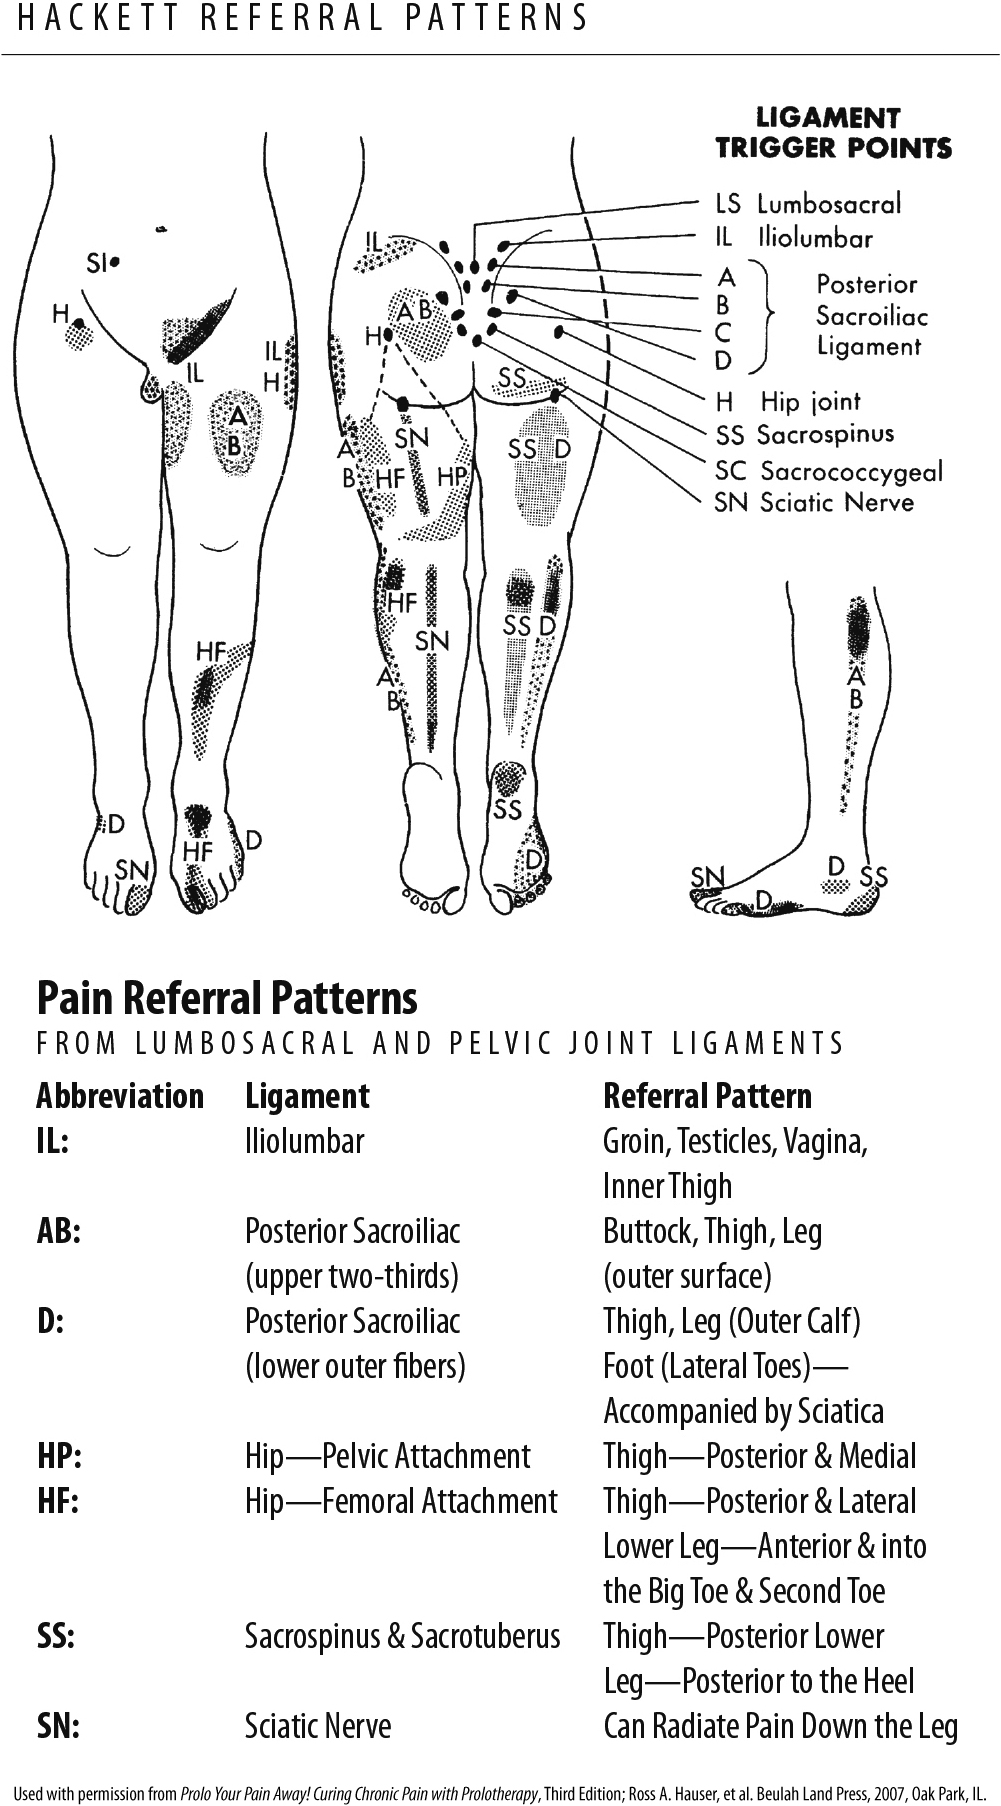 Ligament referral pain patterns from structures in the lower back and hip.